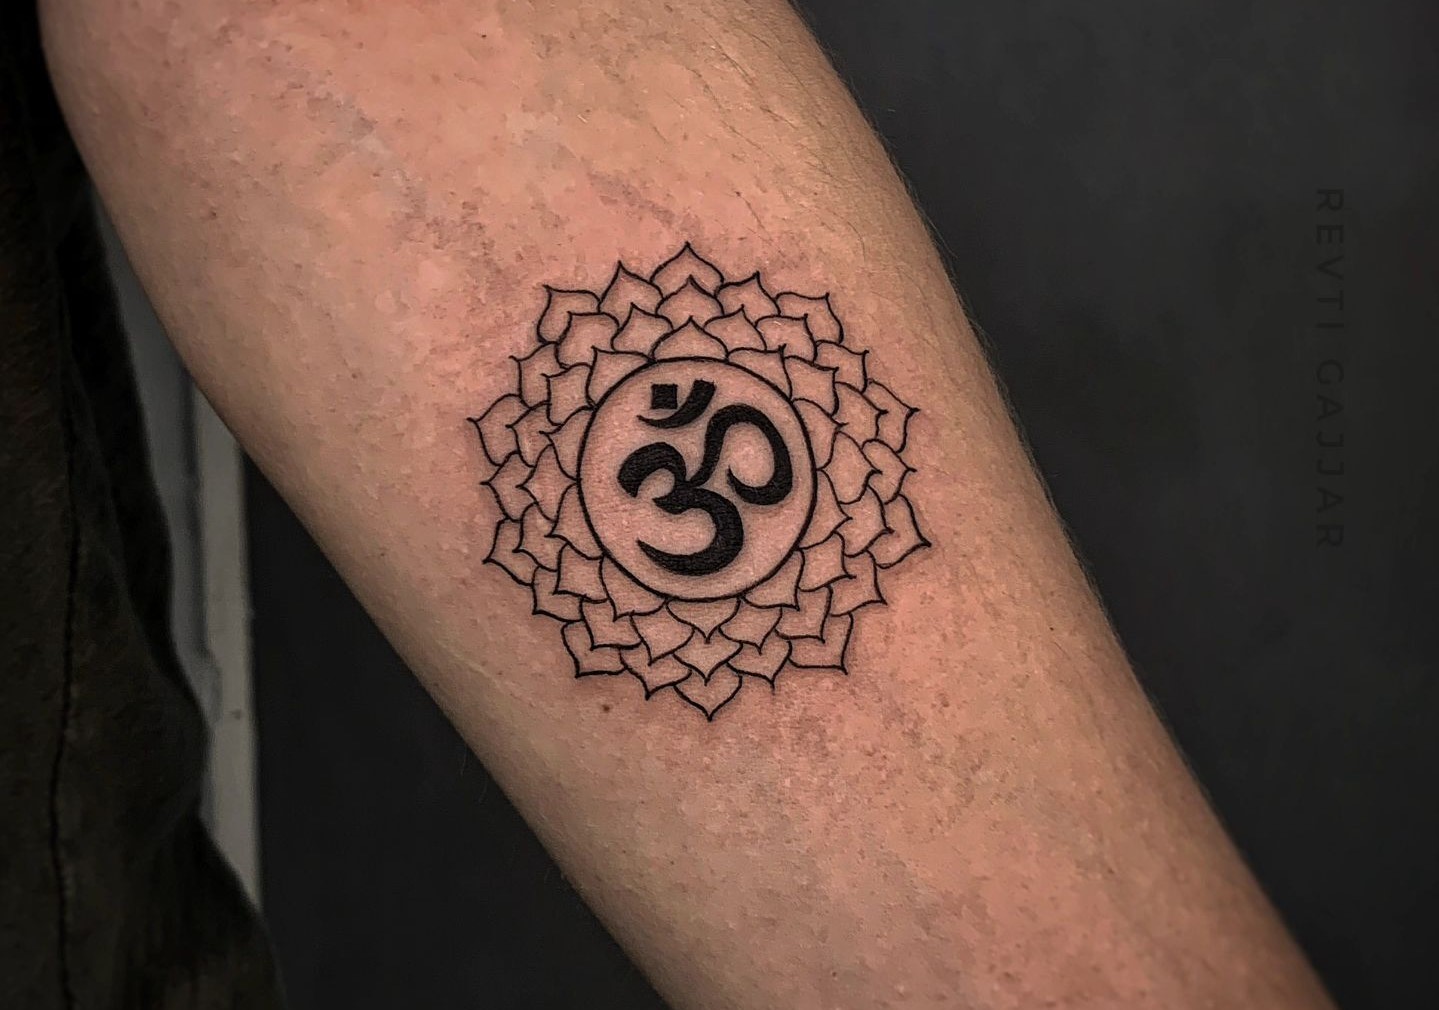 Tattoo uploaded by Savannah Trevino • 7 chakra symbols w/ line work  detailing going down the spine by Polo @ Twisted Tattoo • Tattoodo